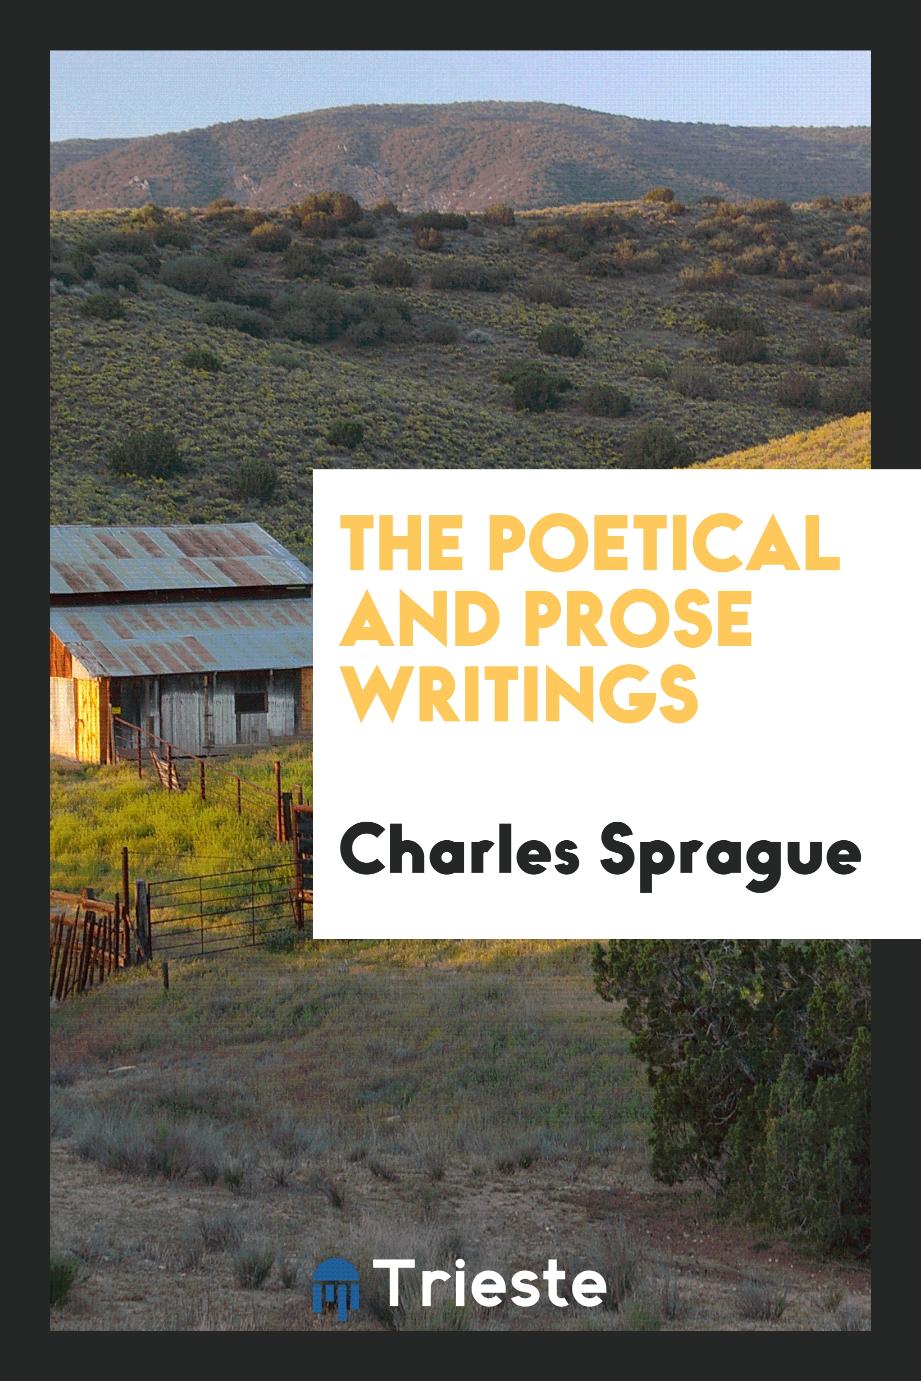 The Poetical and Prose Writings